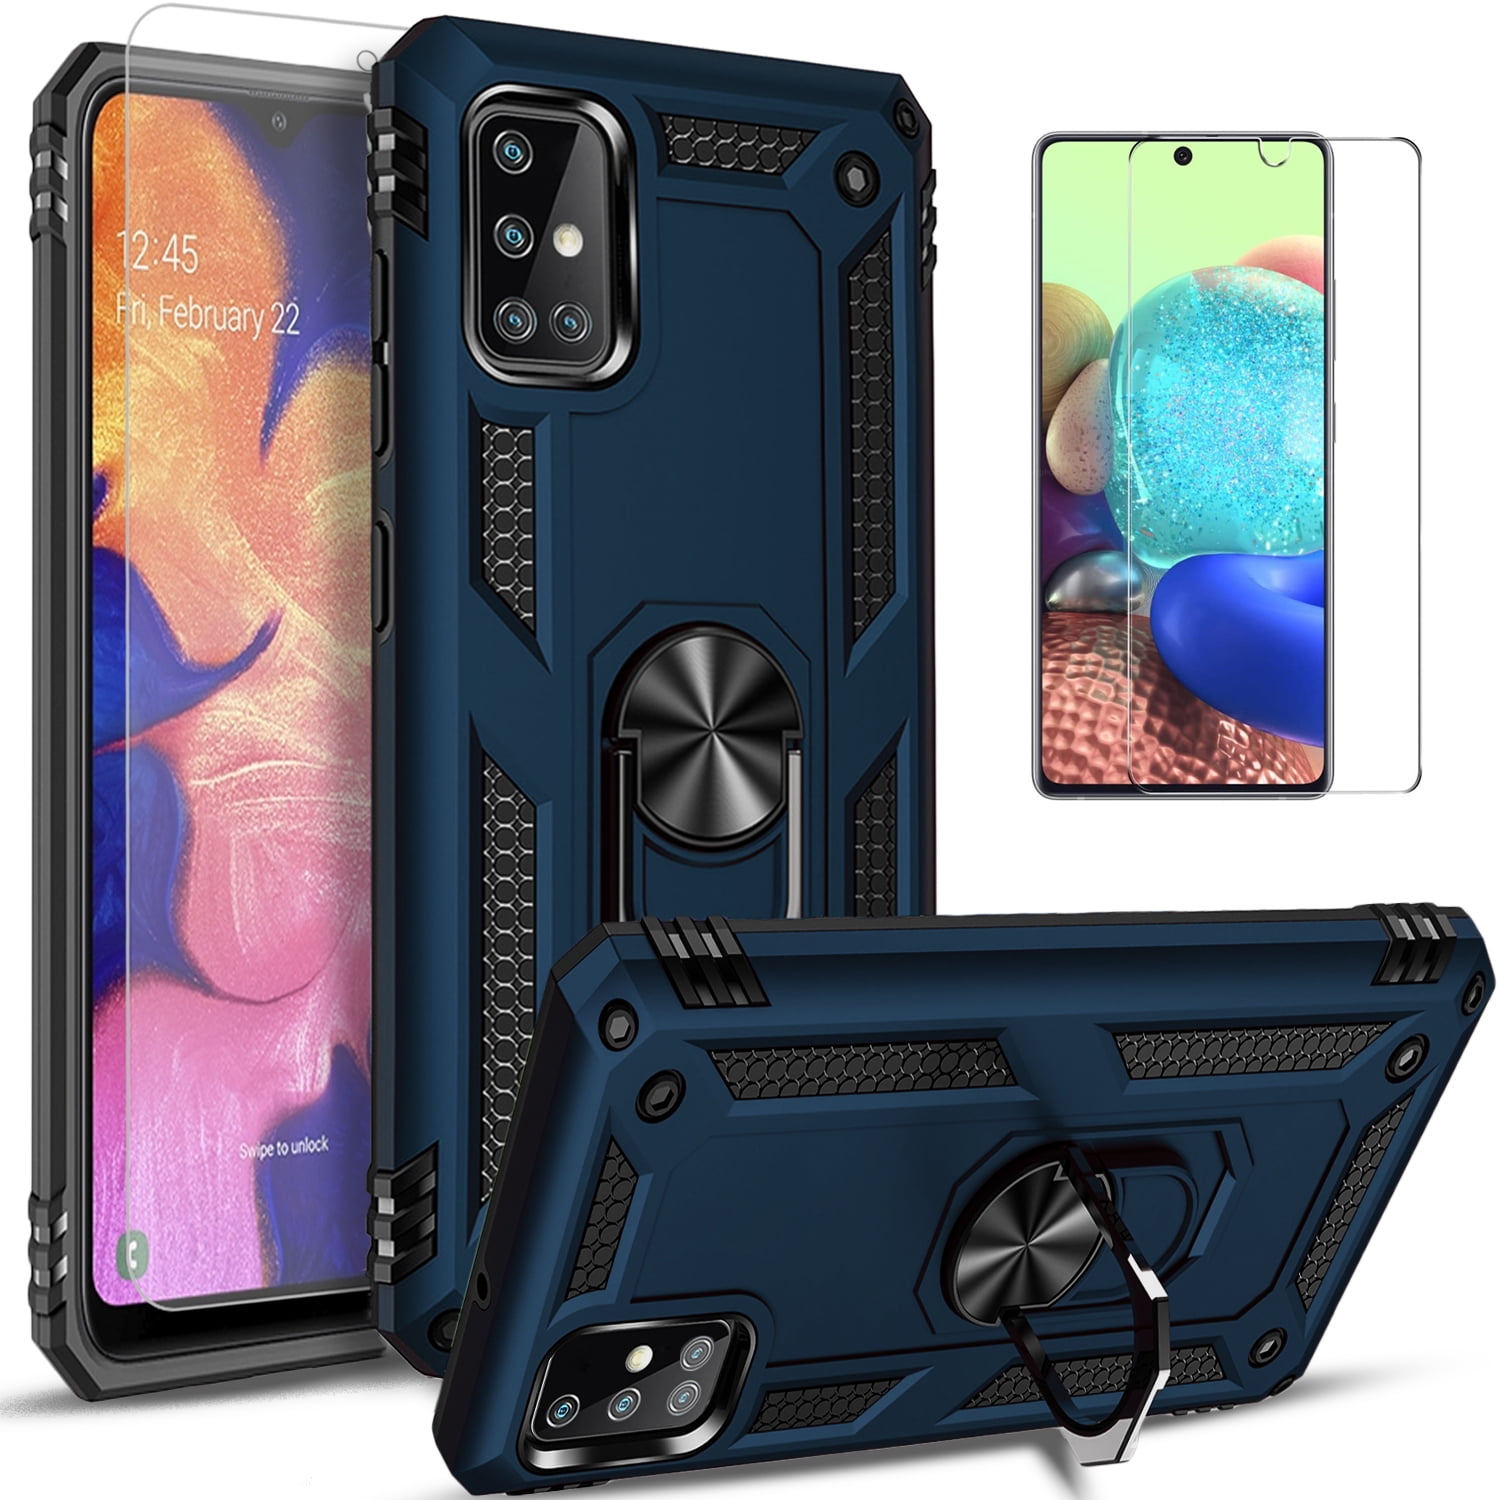 Samsung Galaxy A71 5G Case, With [Tempered Glass Screen Protector Included], STARSHOP Drop Protection Ring Kickstand Cover- Ink Blue